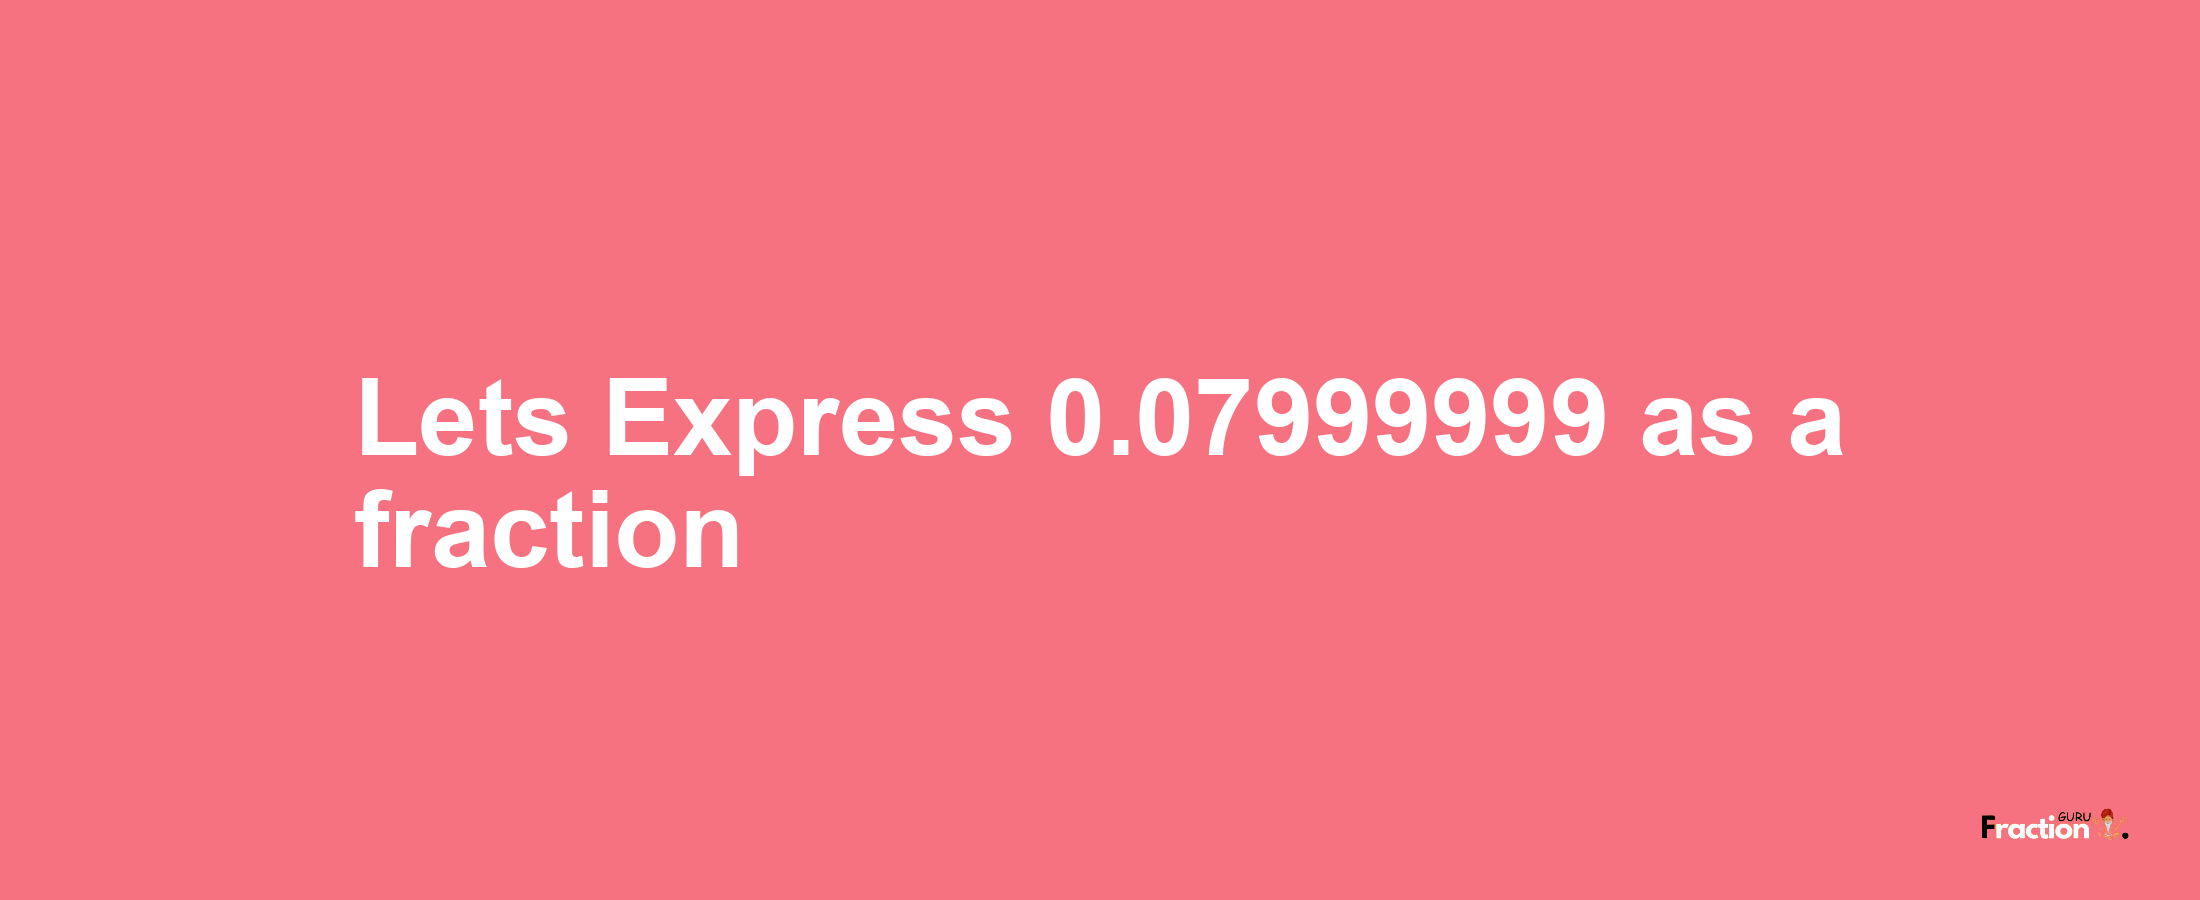 Lets Express 0.07999999 as afraction